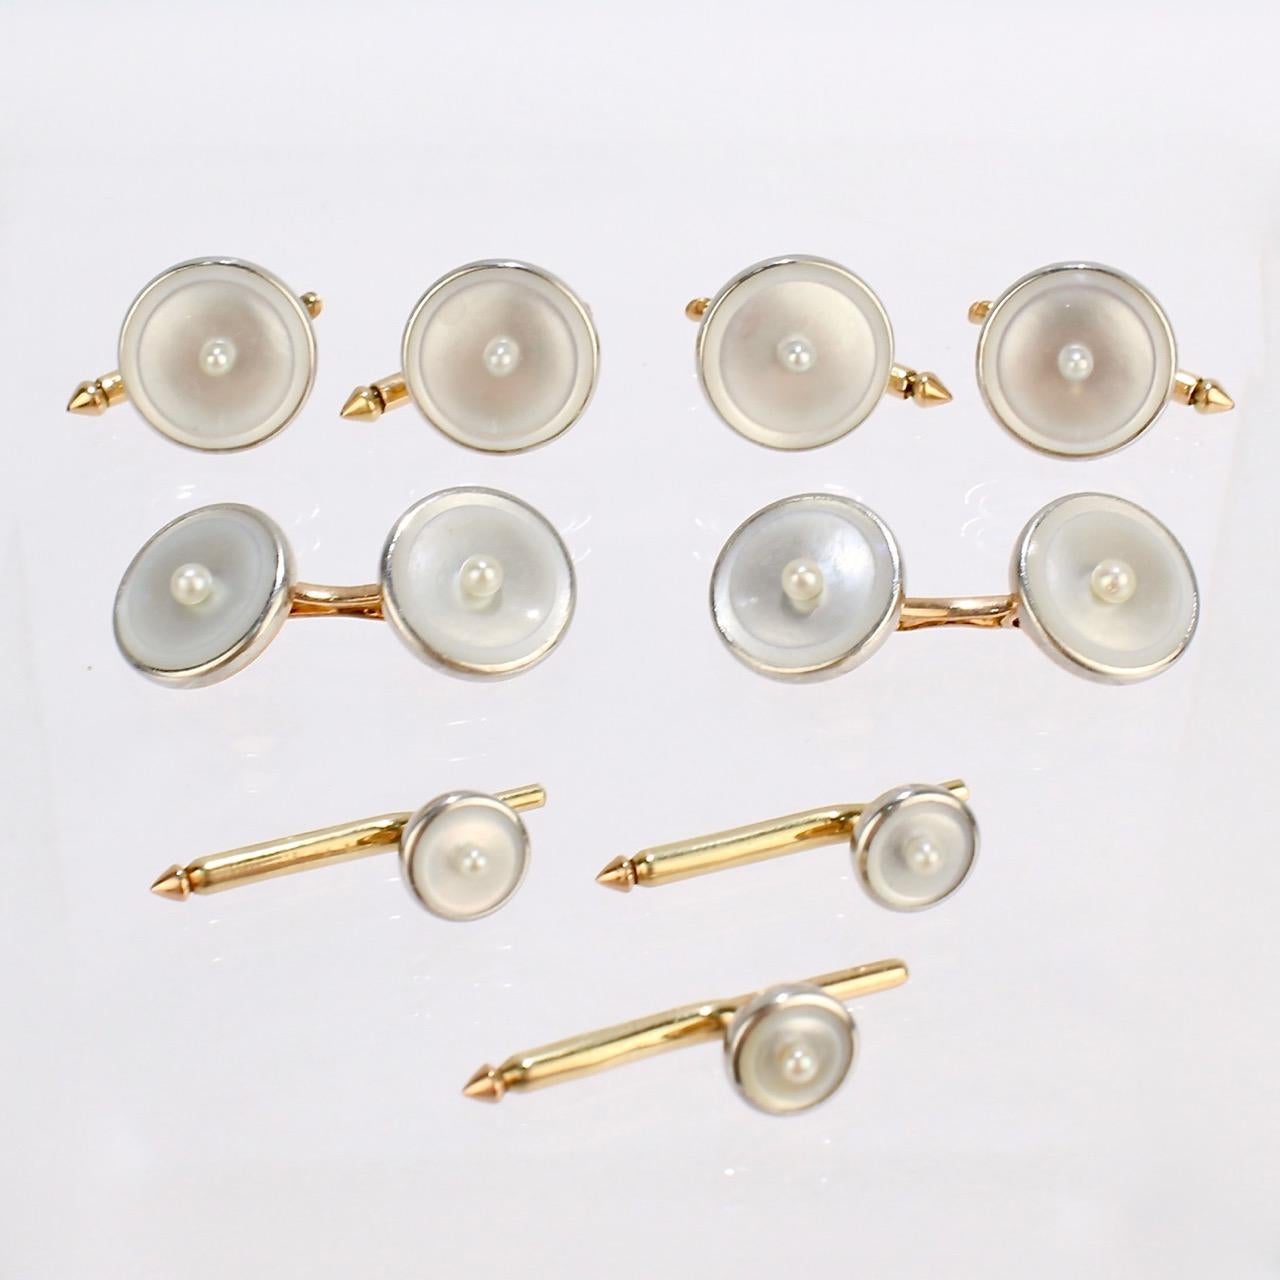 A fine, complete Art Deco 14k gold dress set with mother-of-pearl and seed pearls.

Comprised of a pair of Carrington & Co. cufflinks and collar studs together with 4 associated Larter & Sons vest buttons.

The cufflinks and studs bear the C&C and